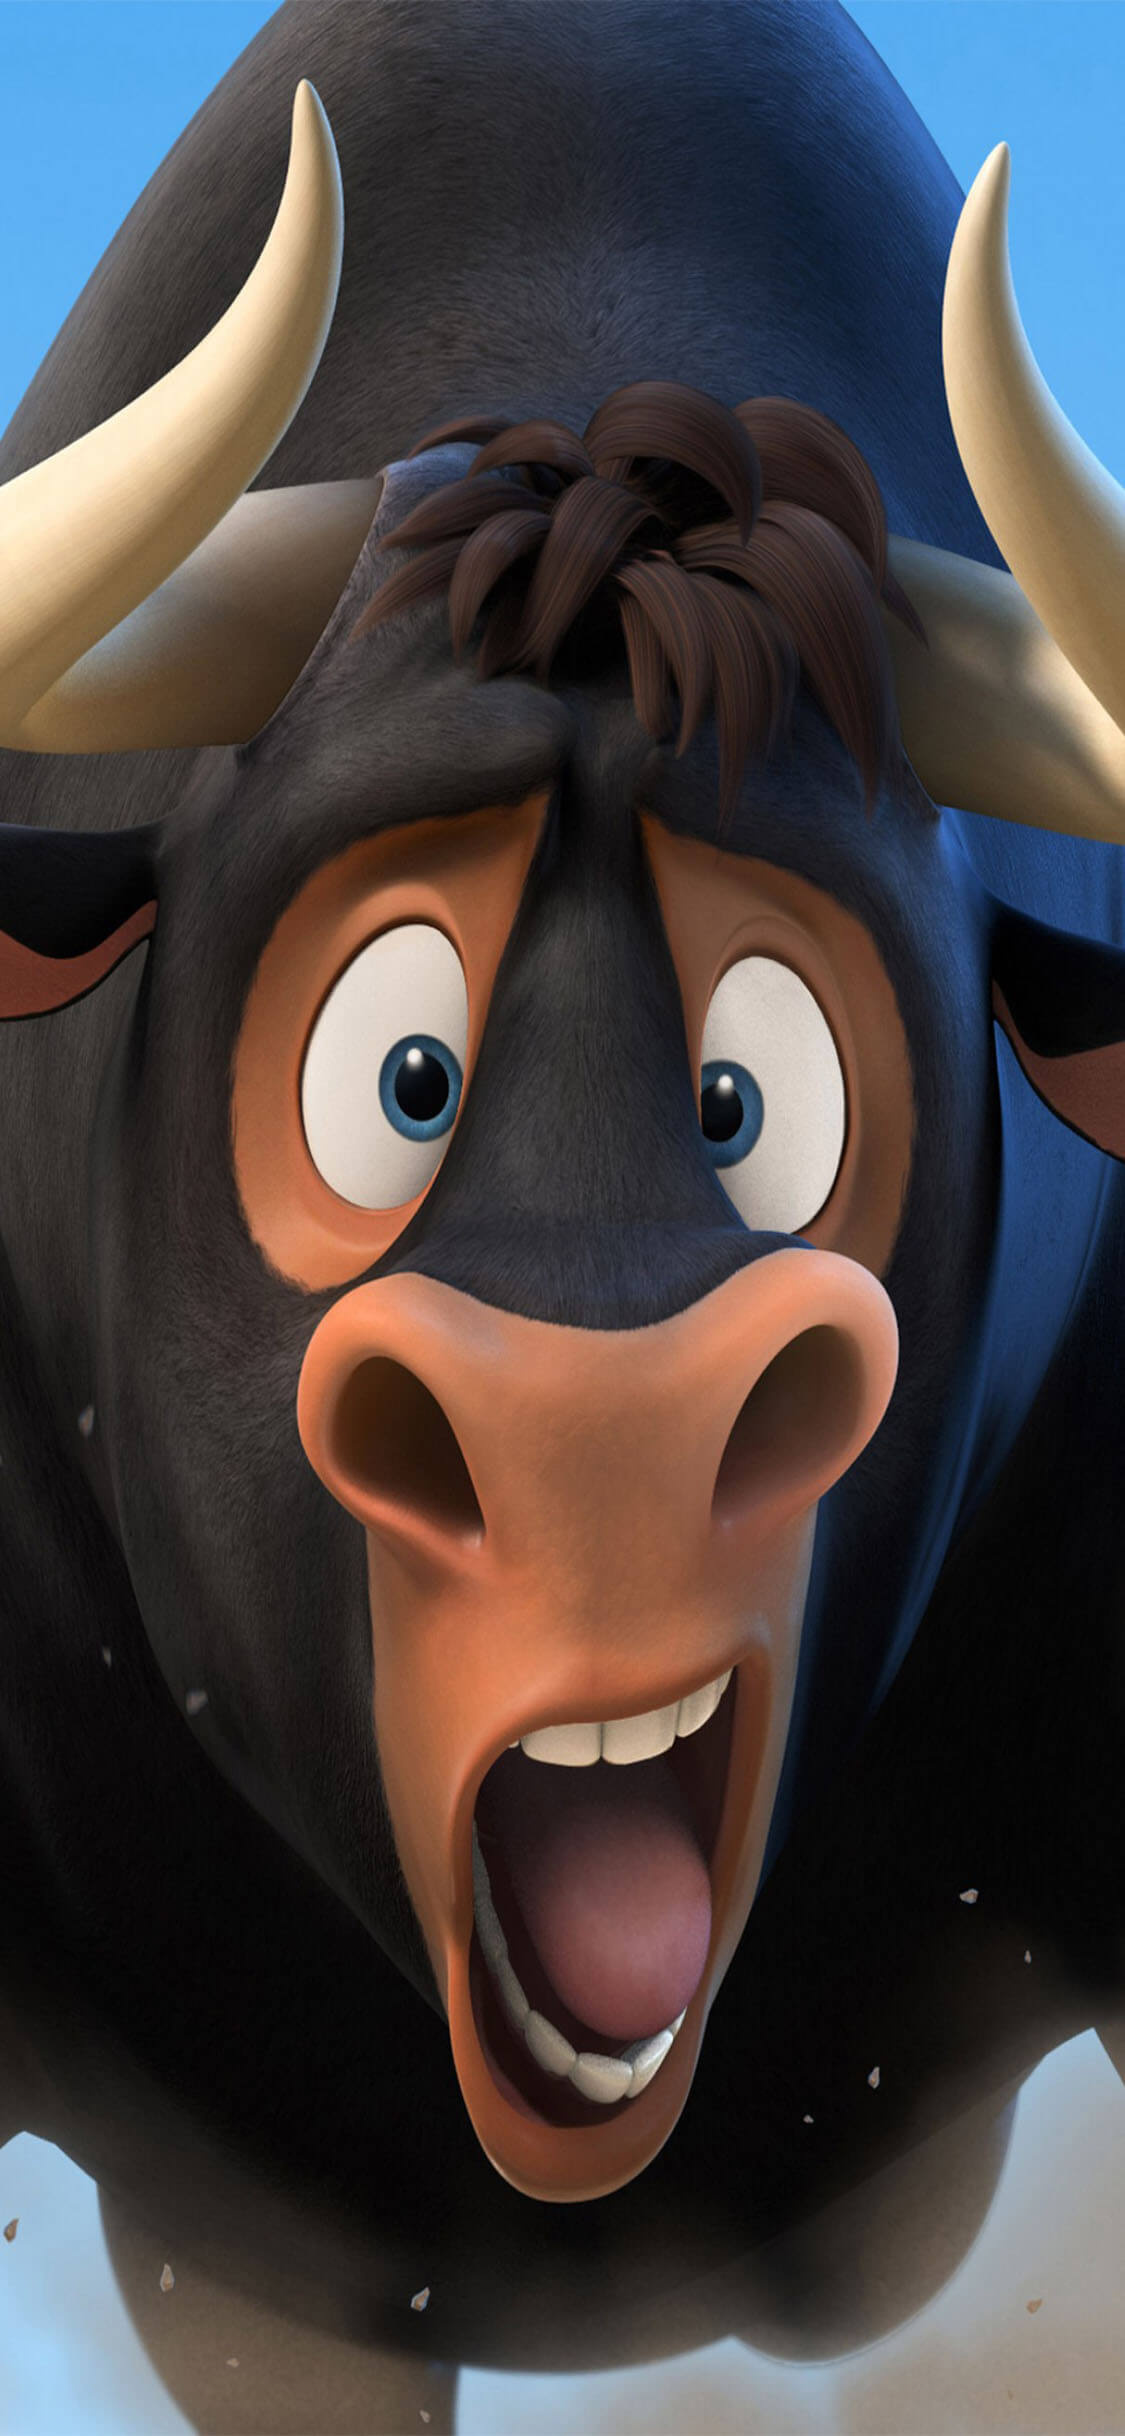 Ferdinand Animation, Cartoon wallpapers, Optimized for iPhone, Animated fun, 1130x2440 HD Handy